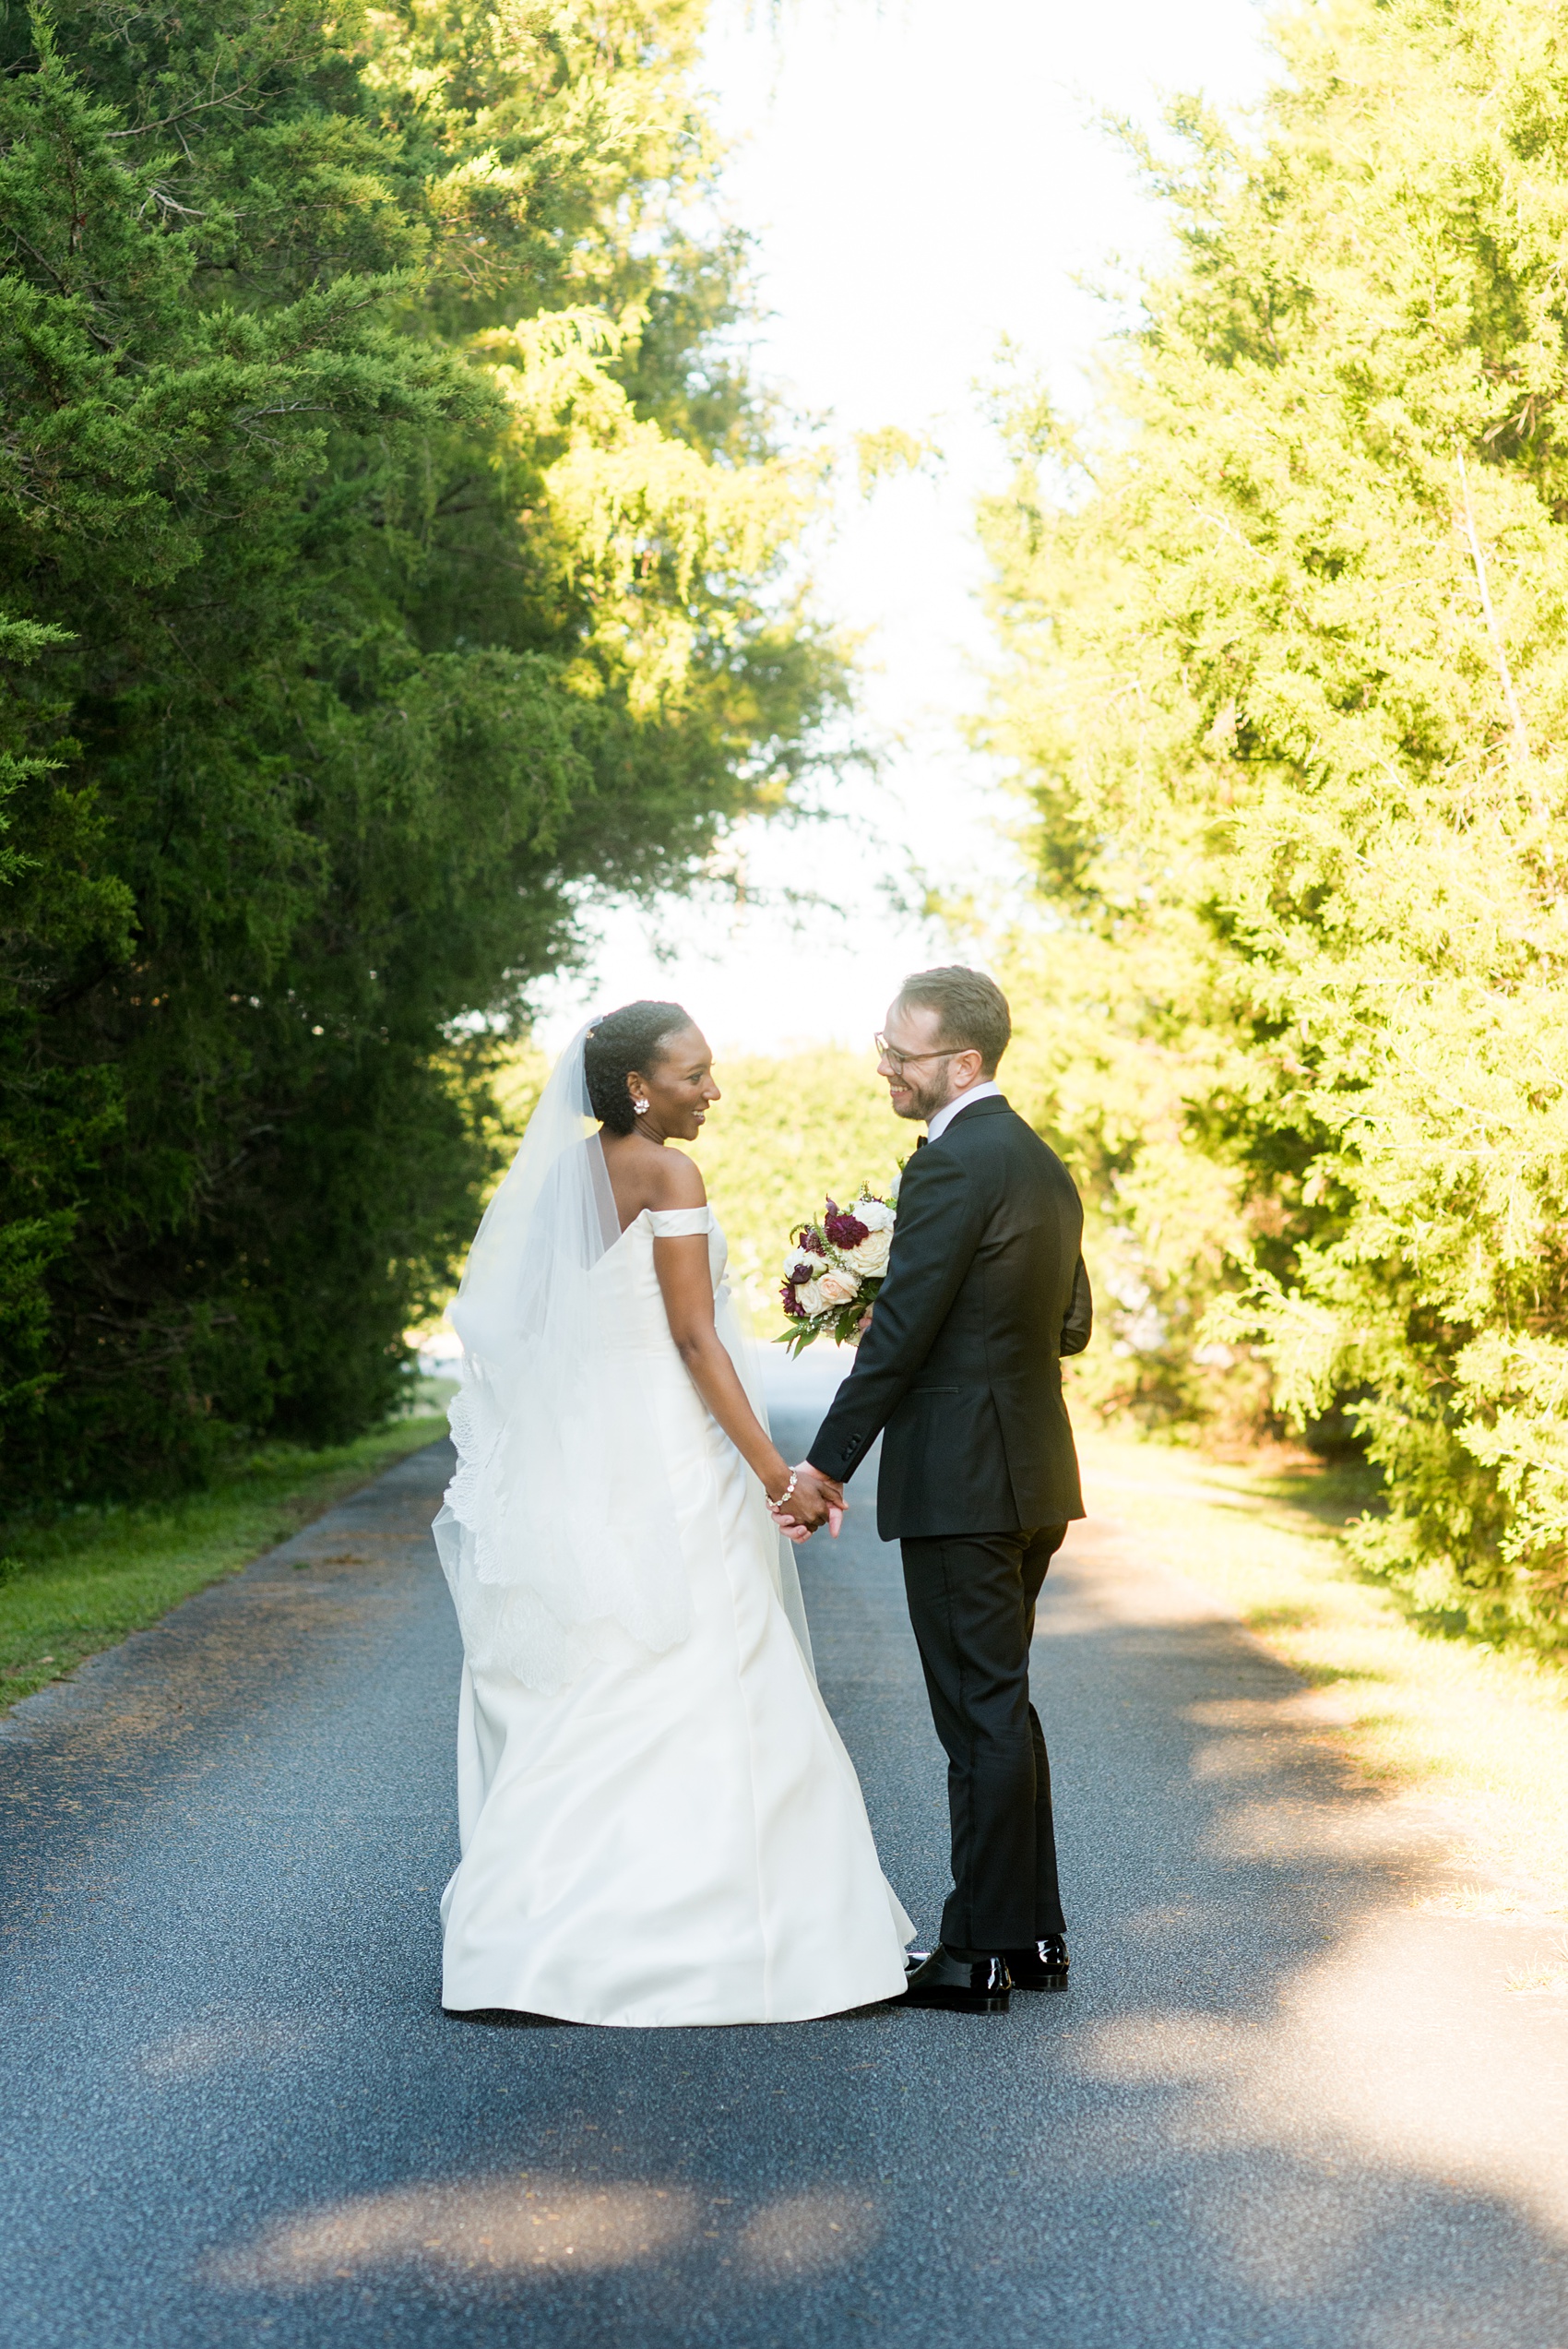 A fall wedding with burgundy, dusty rose and grey details. Mikkel Paige Photography, photographer in Greenville NC and Raleigh, captured this wedding at Rock Springs Center, planned by @vivalevent. The bride and groom had beautiful photos during golden hour on an autumn day! Click through for details! #mikkelpaige NCwedding #northcarolinawedding #southernwedding #brideandgroom